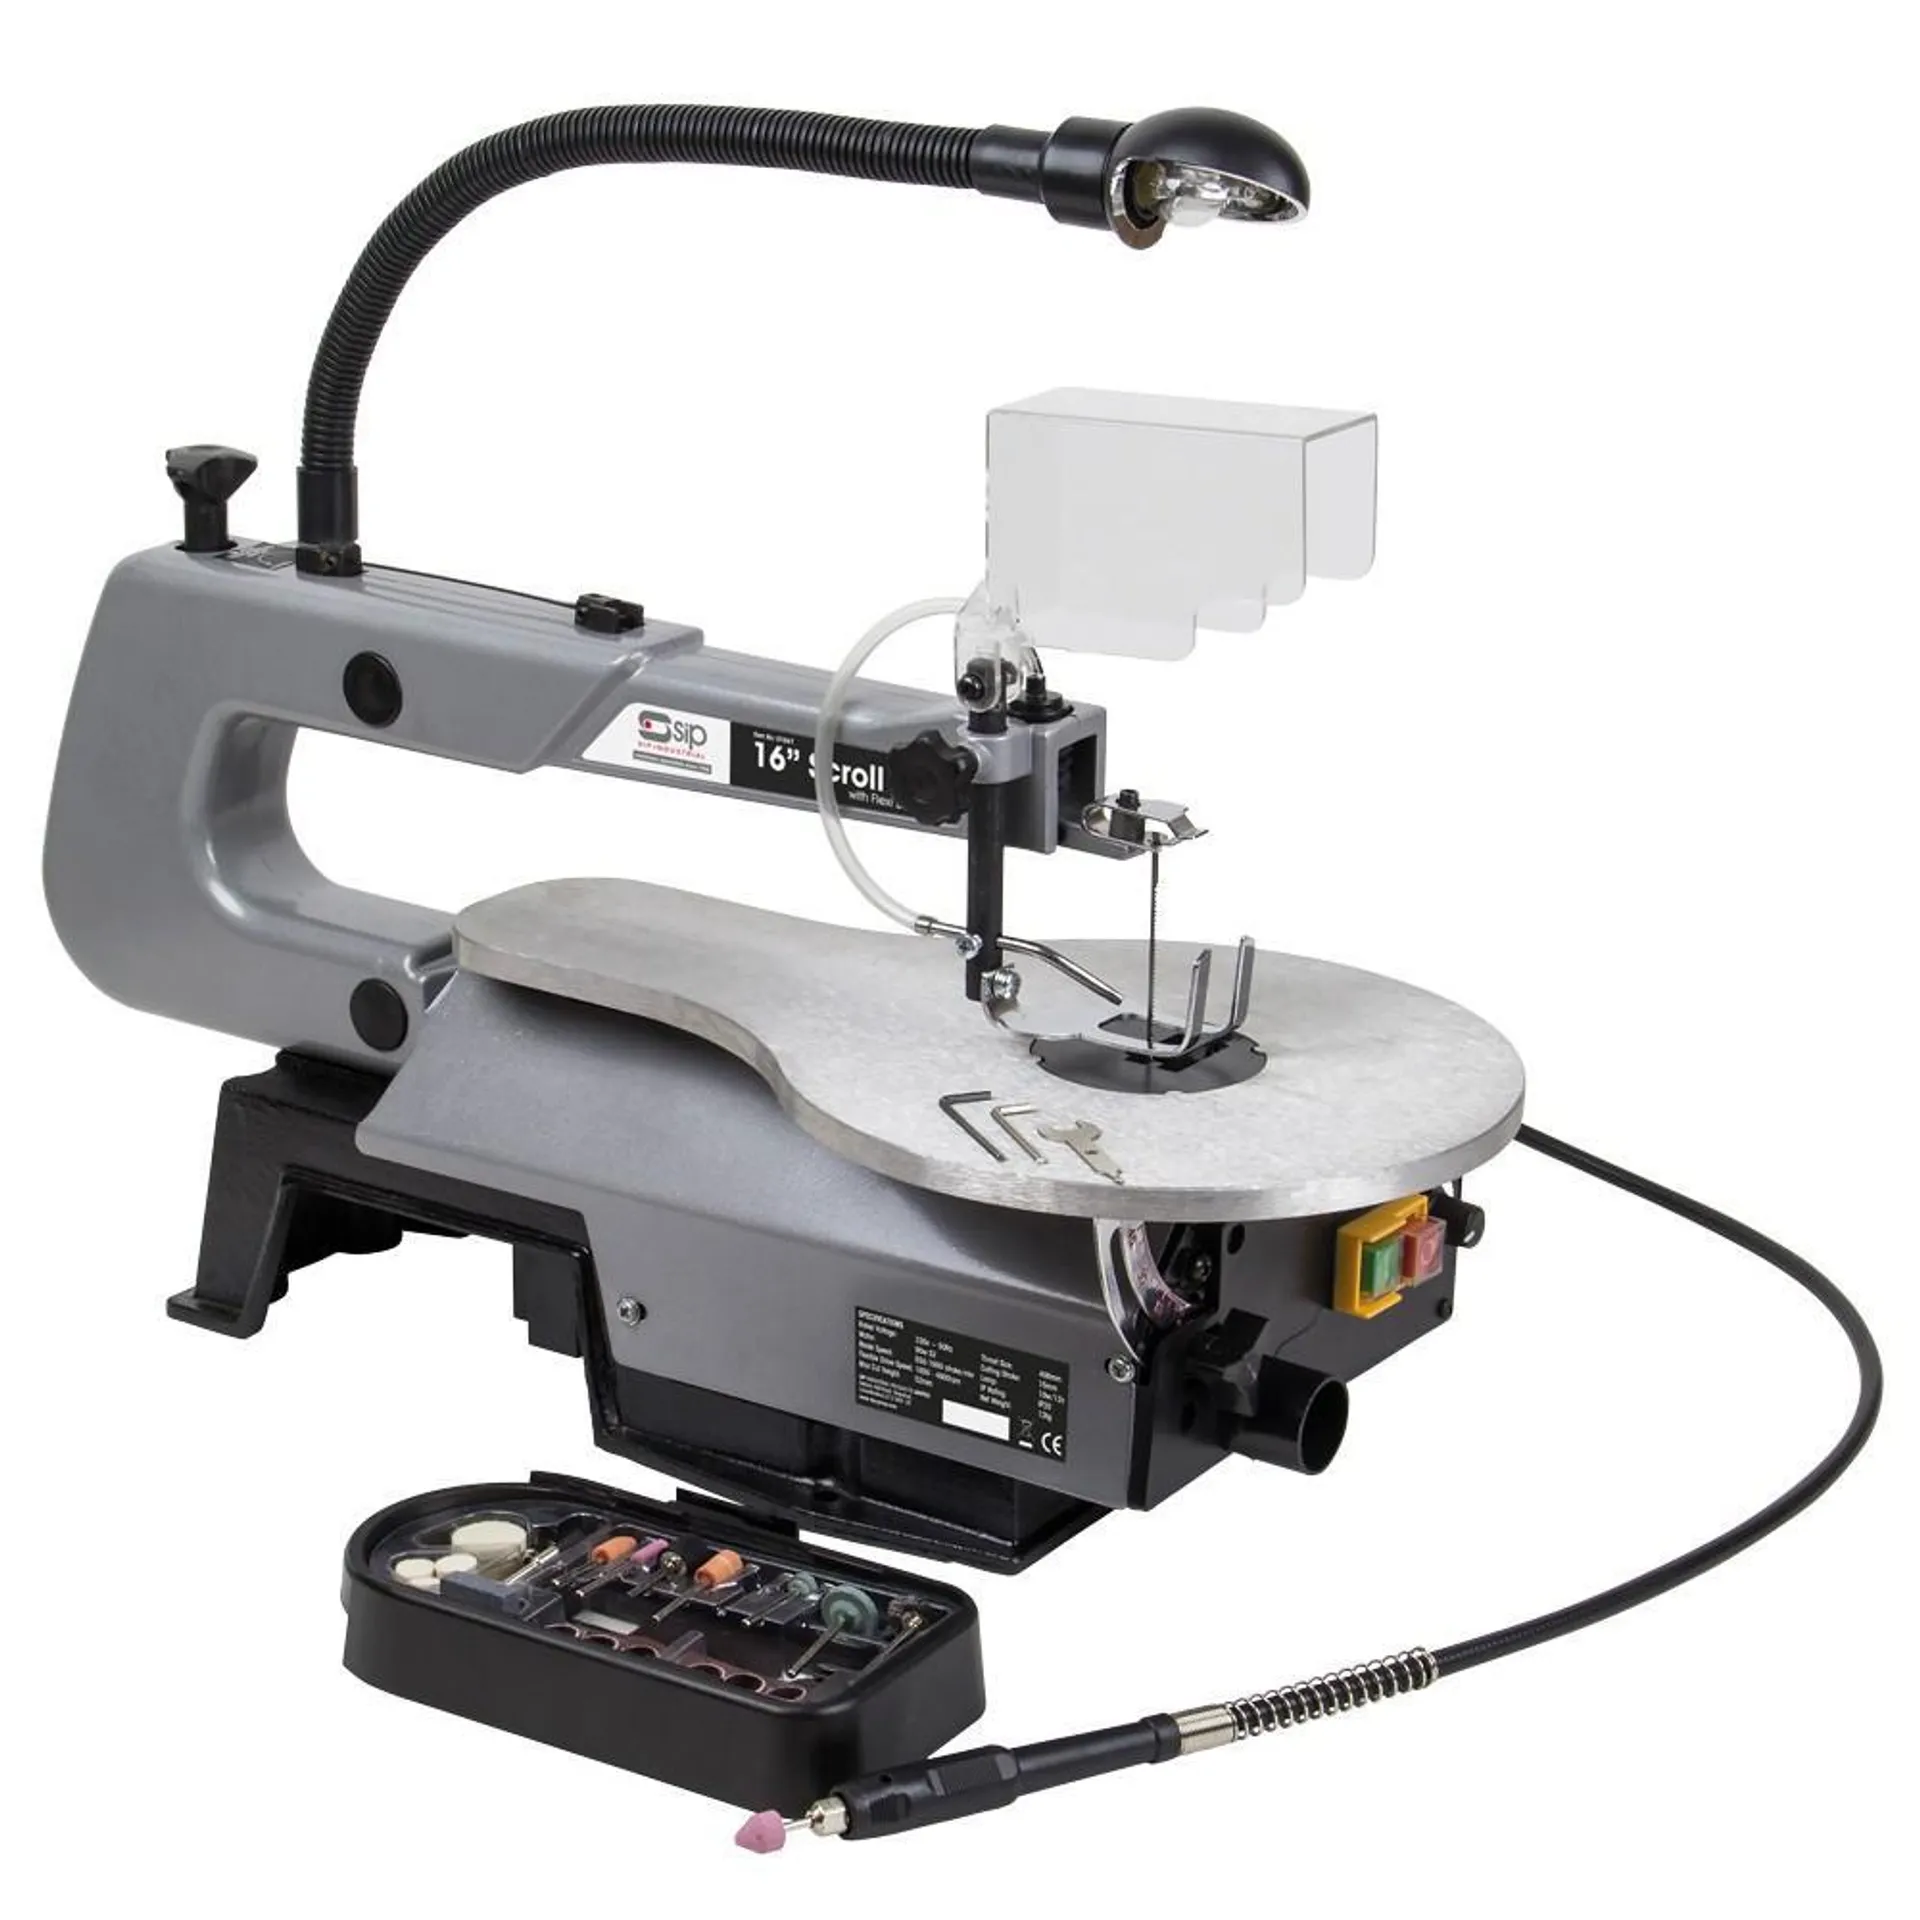 01947 16" Scroll Saw With Flexi-Drive Shaft